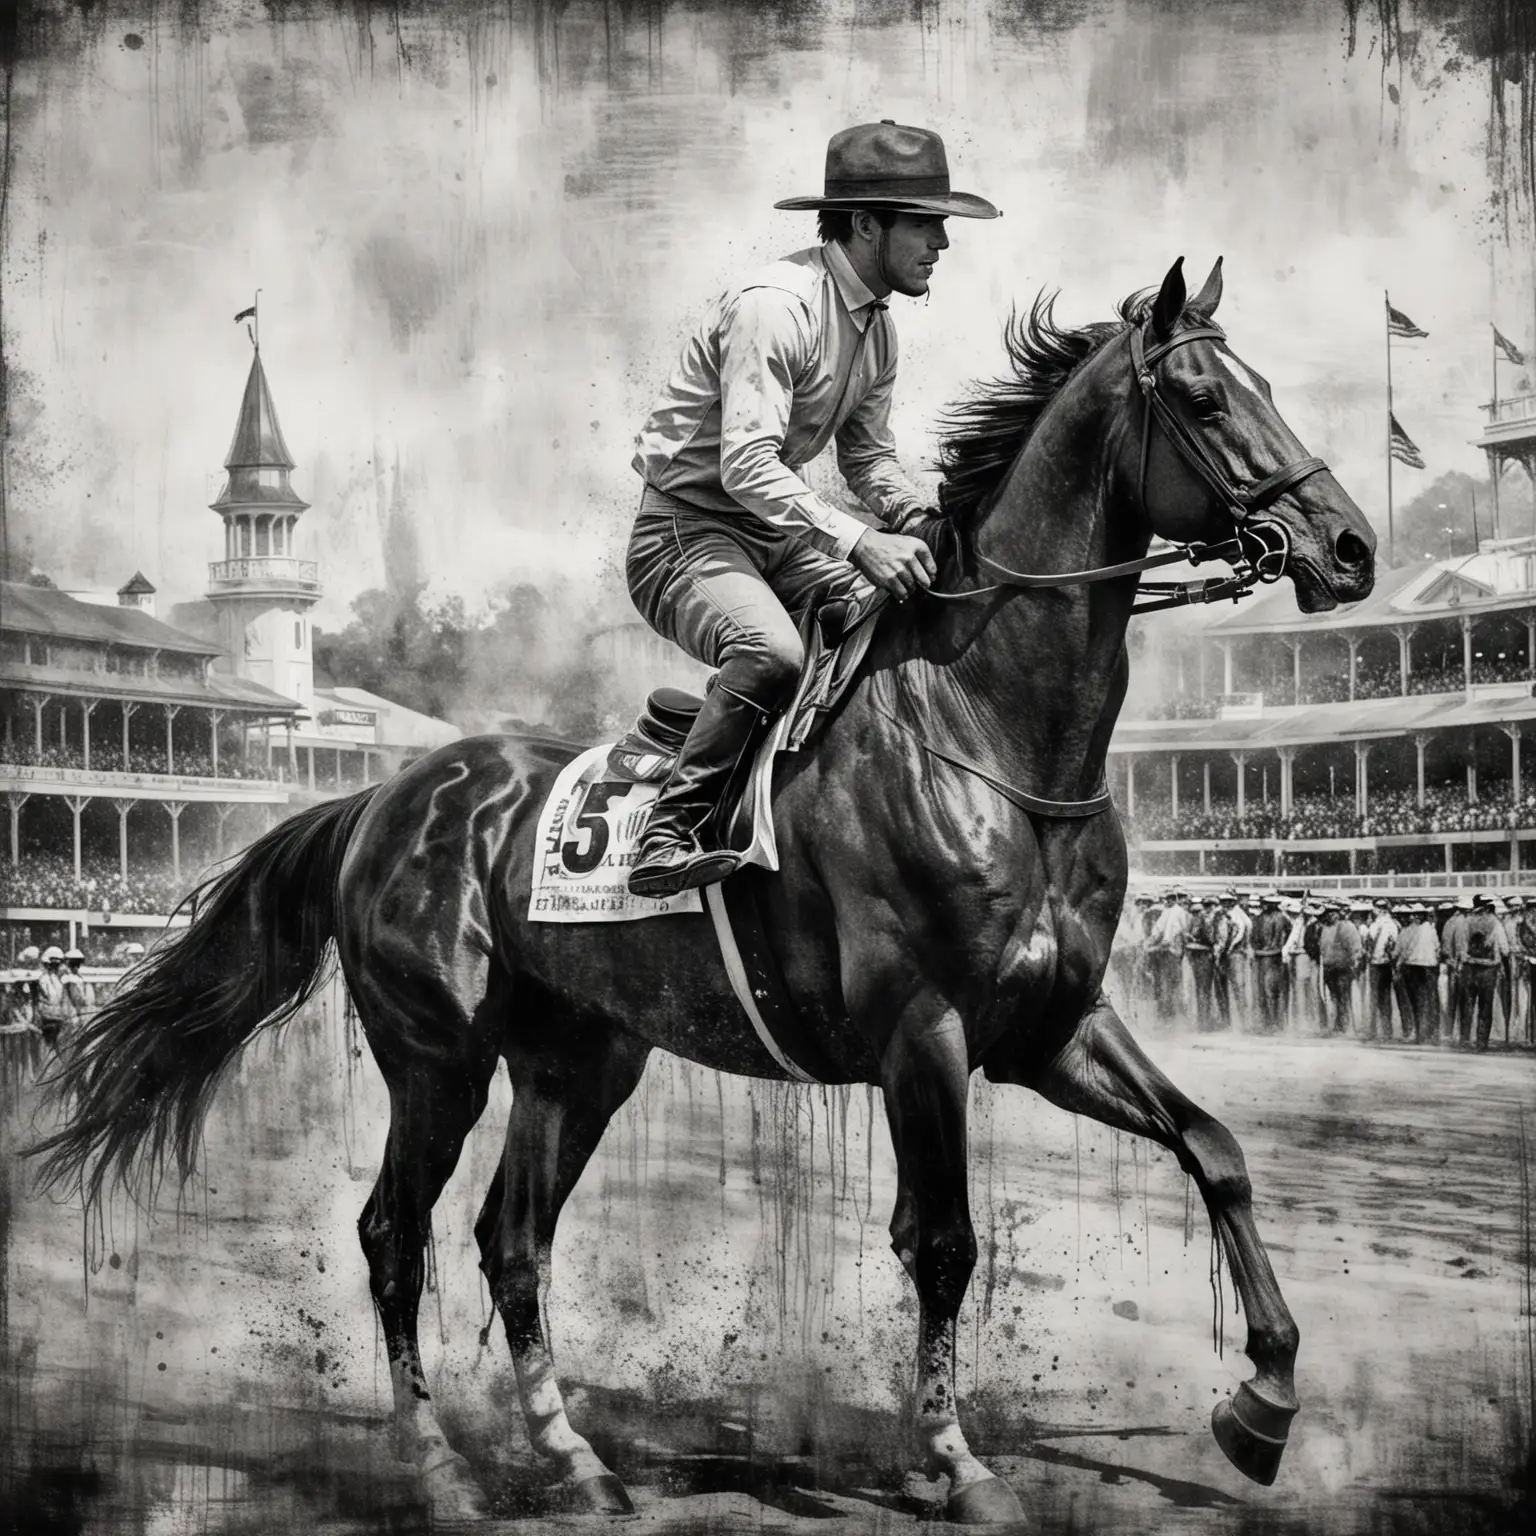 Kentucky Derby with grunge art, black and white art